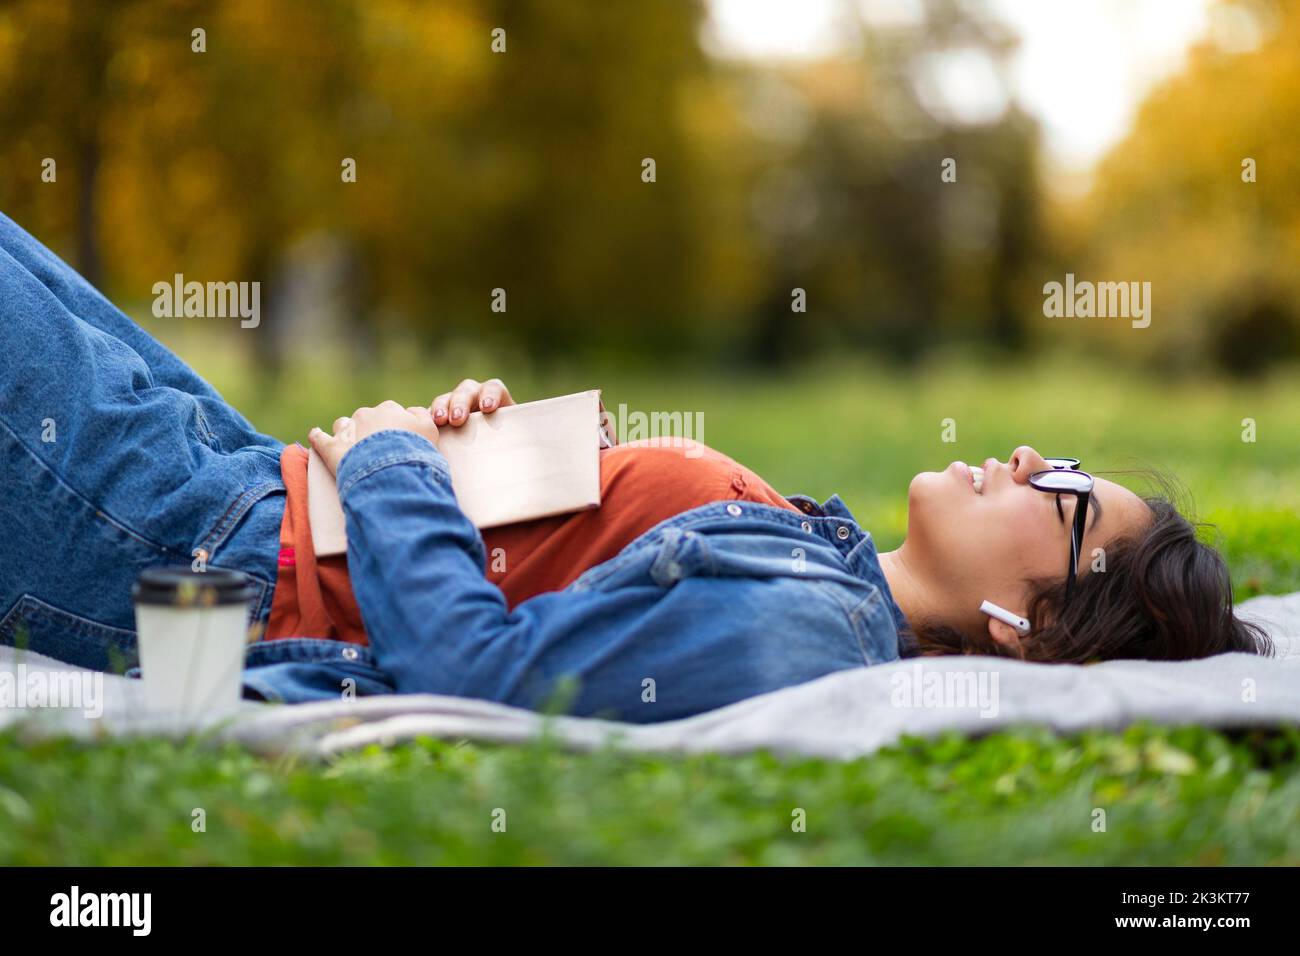 Outdoor Leisure. Nerdy Arab Female In Eyeglasses Lying On Lawn With Book Stock Photo